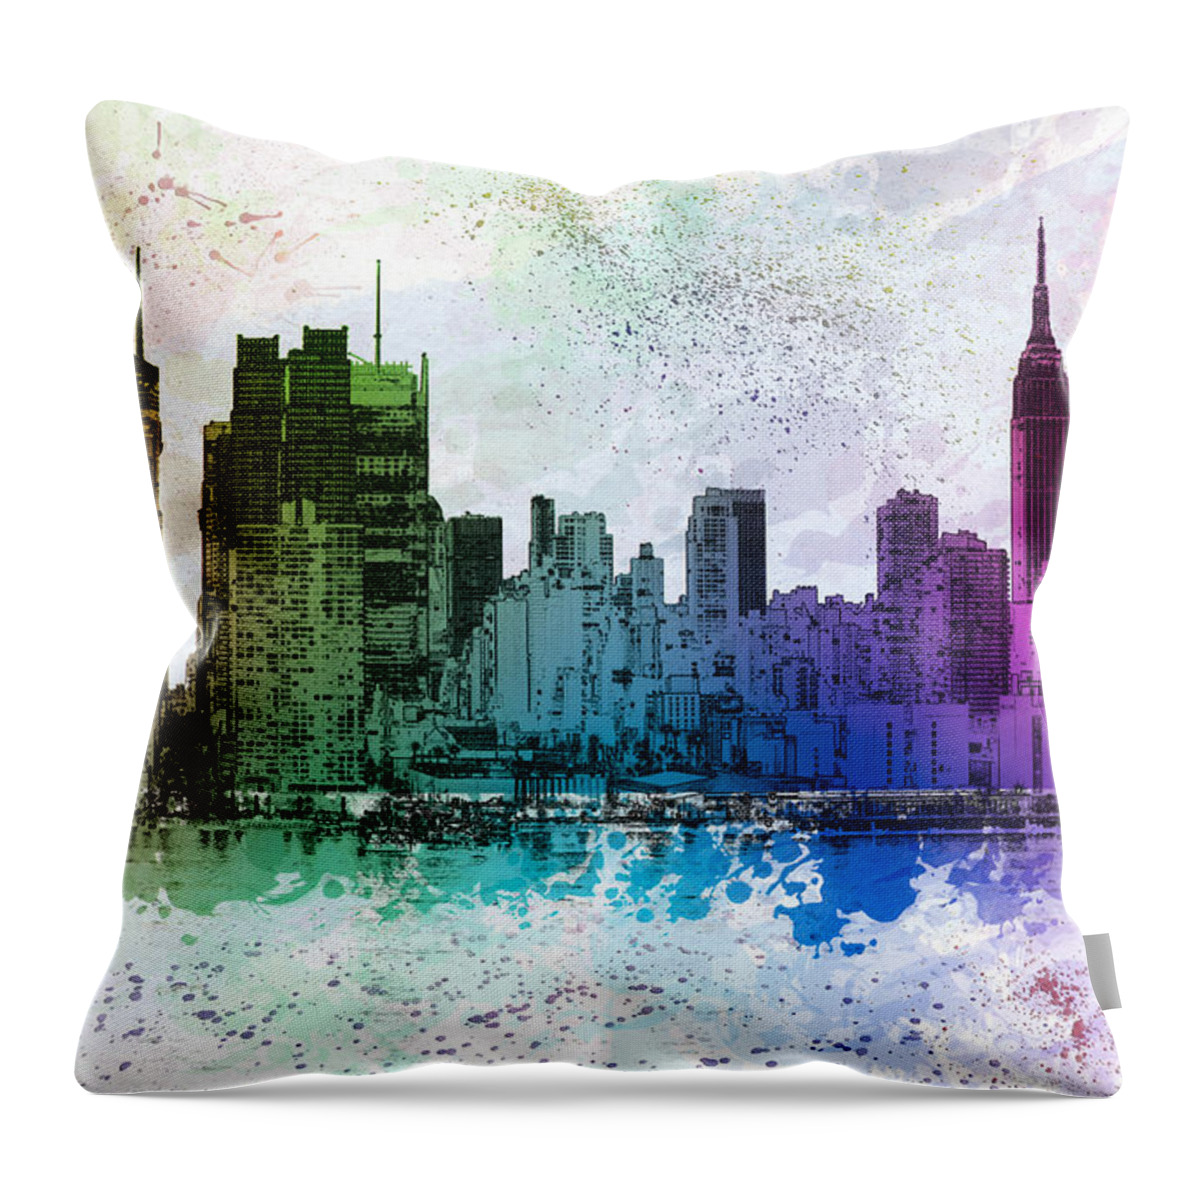 Big Apple Throw Pillow featuring the photograph I Love New York by Susan Candelario